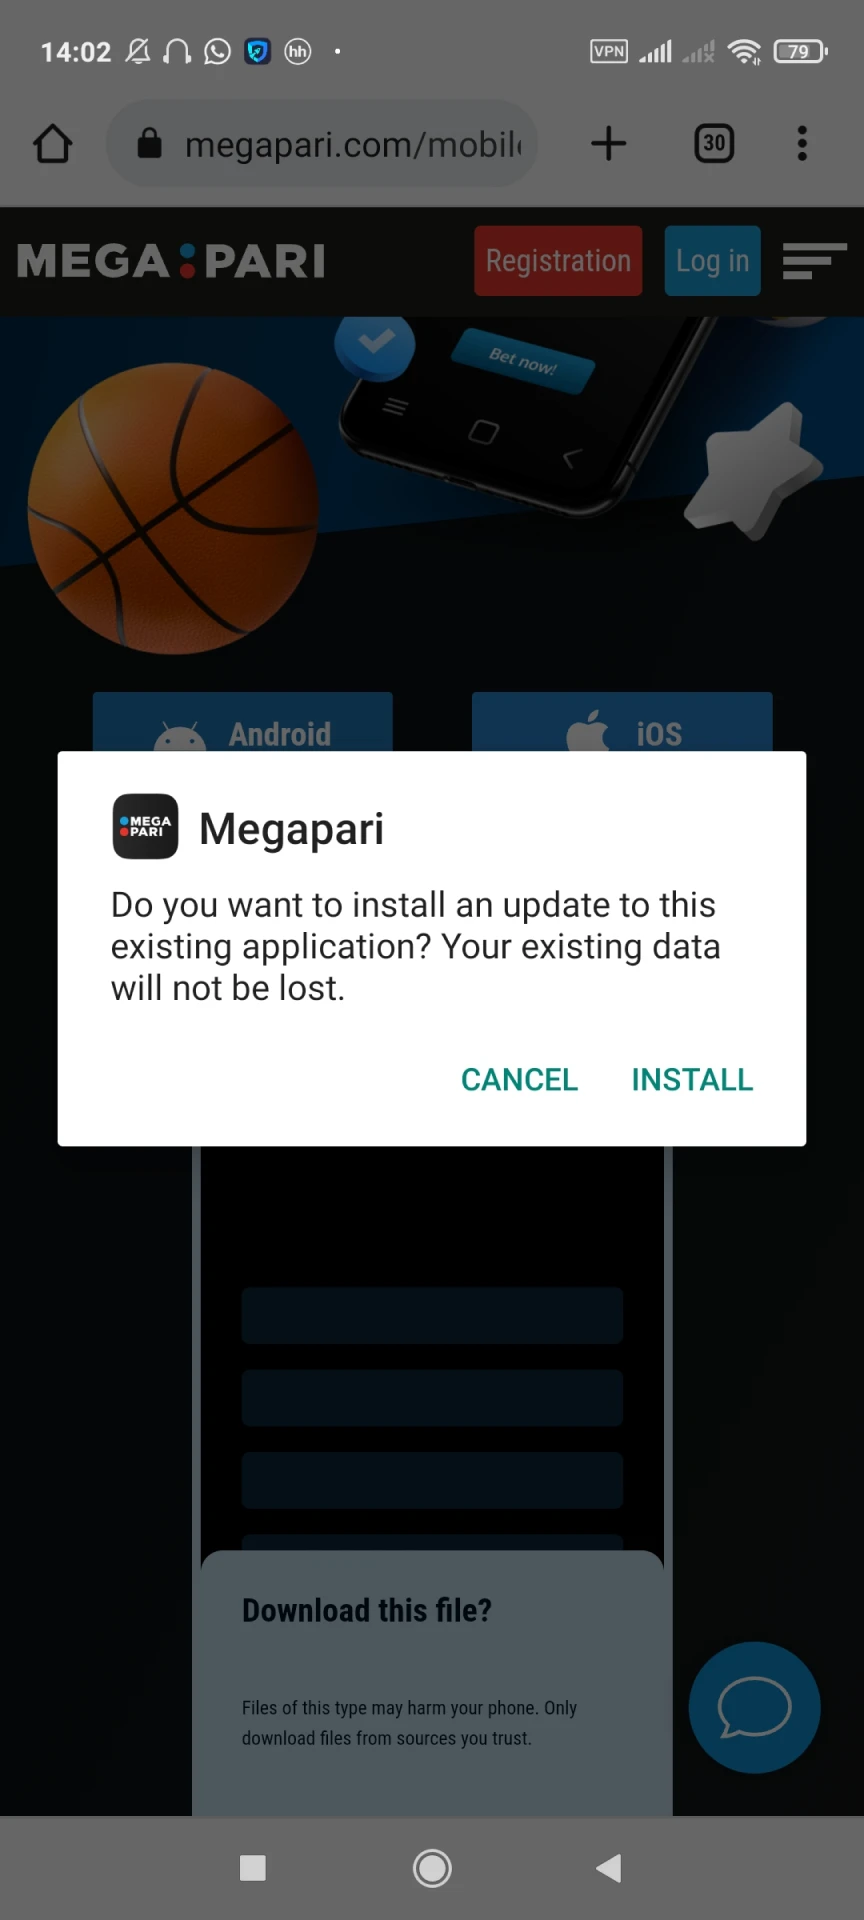 Proceed to install the Megapari app for Android.